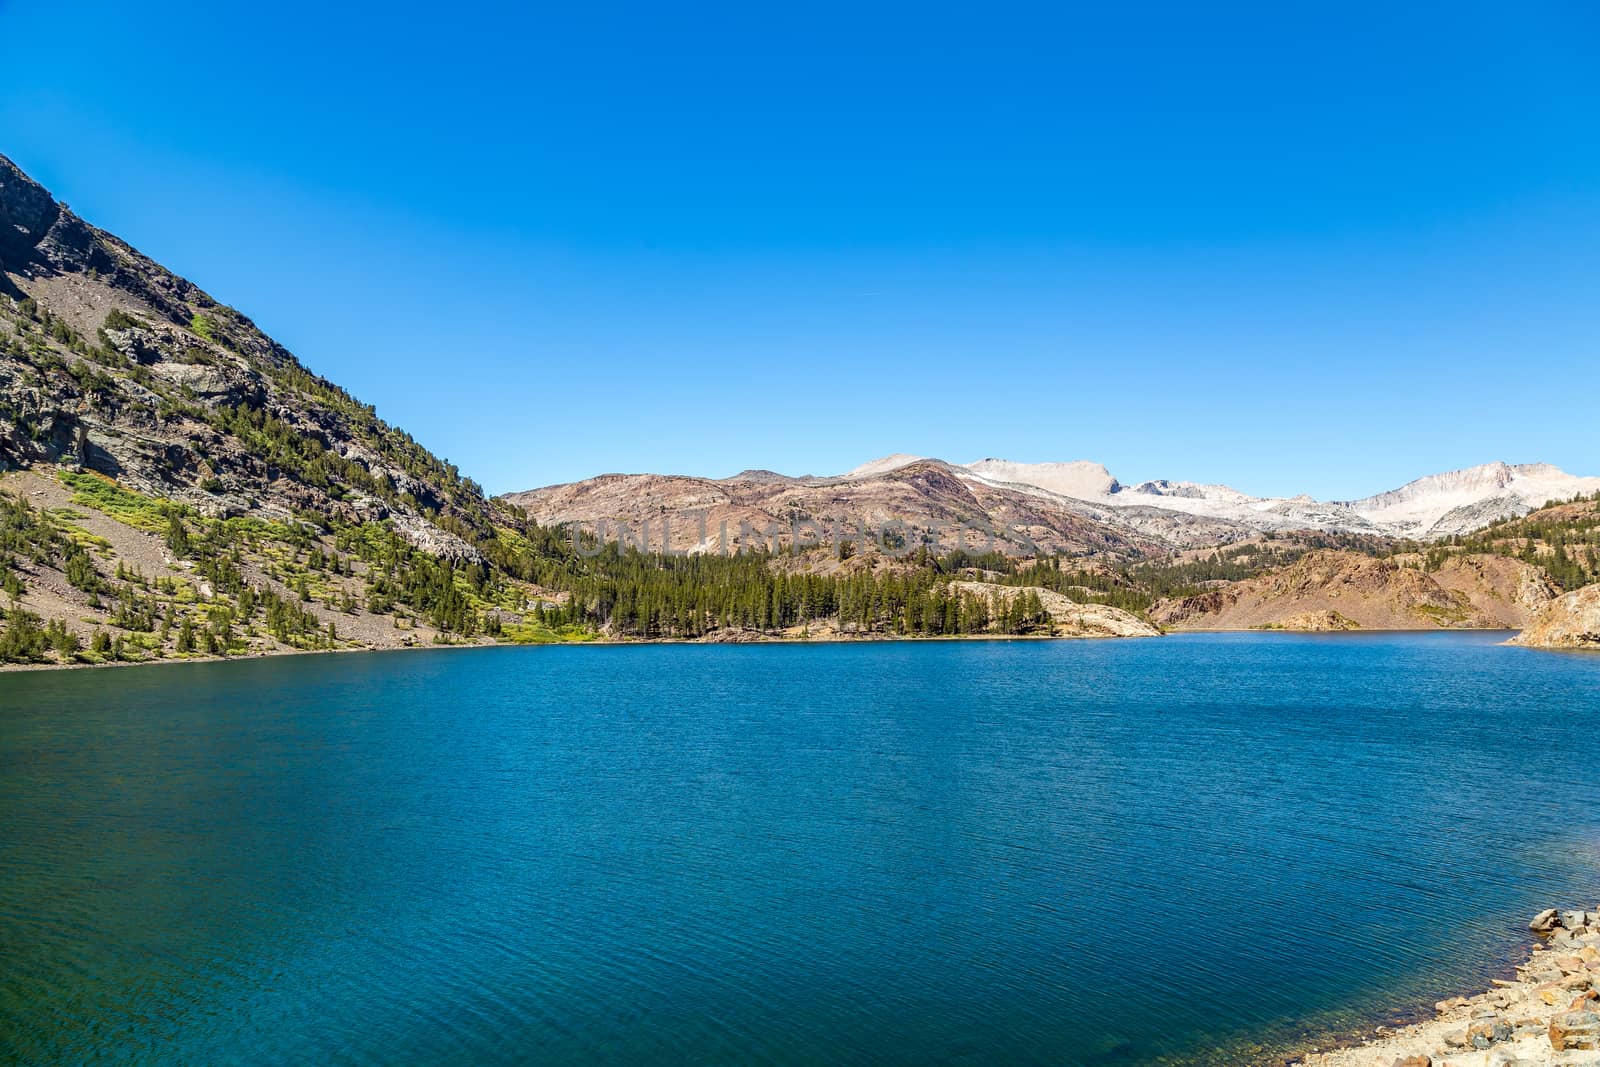 View from the South end of Ellery Lake along the Tioga Road outside Yosemite National Park in the Sierra Nevada mountain range.